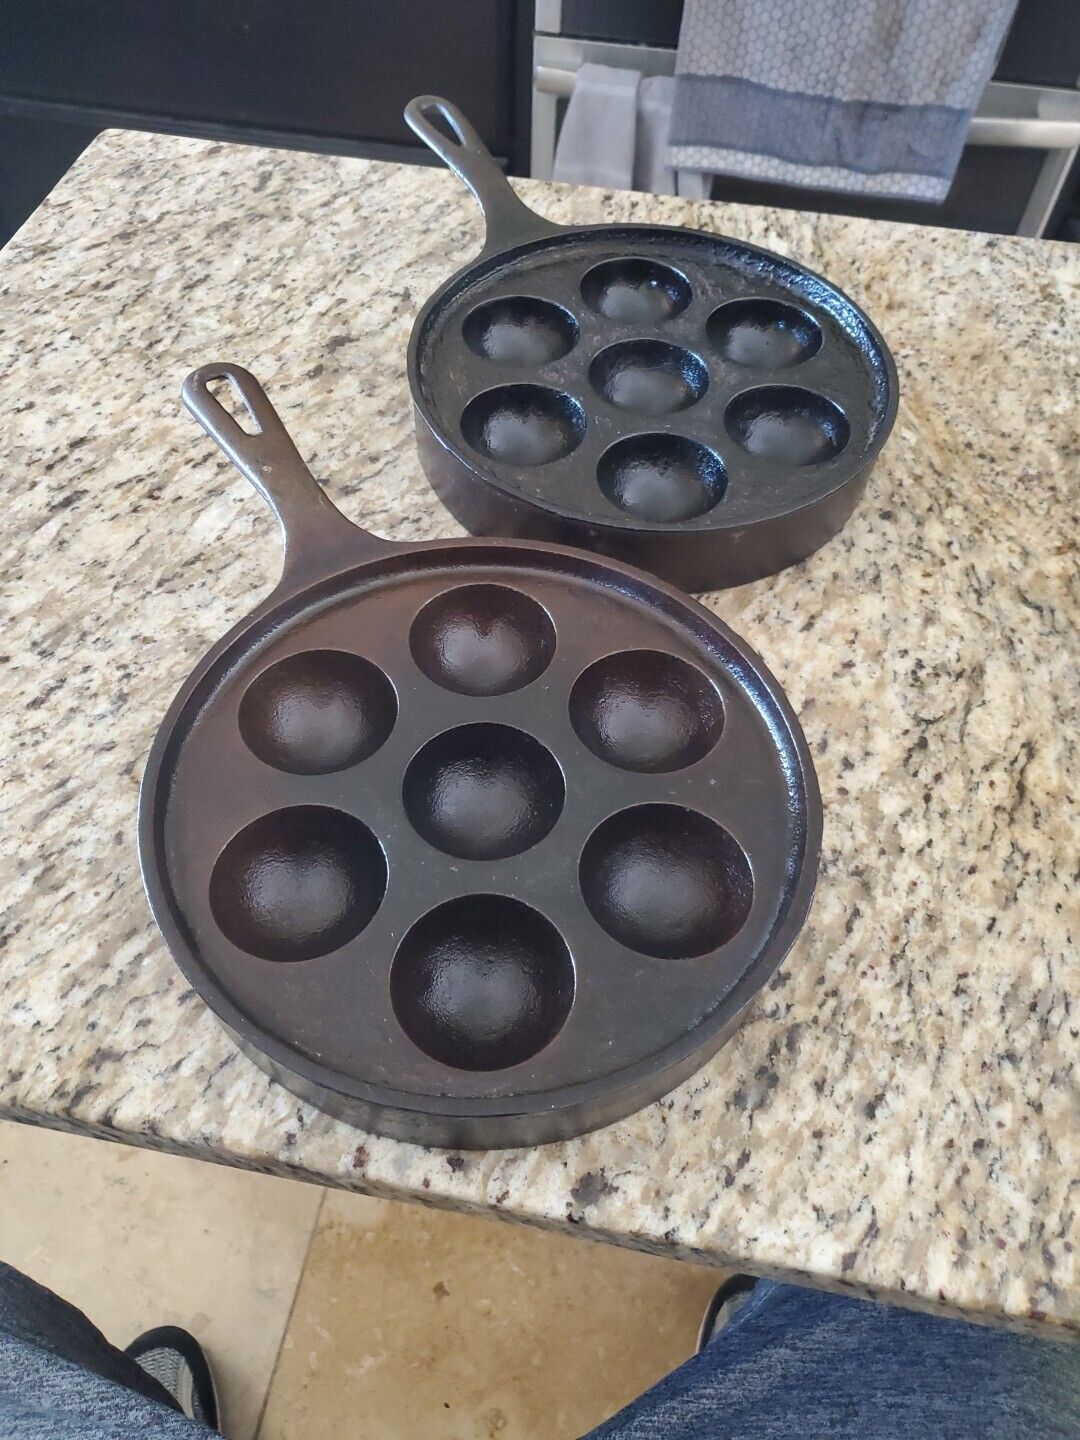 (2)VINTAGE GRISWOLD 962 A CAST IRON No. 32 AEBLESKIVER PAN - MADE IN U.S.A.